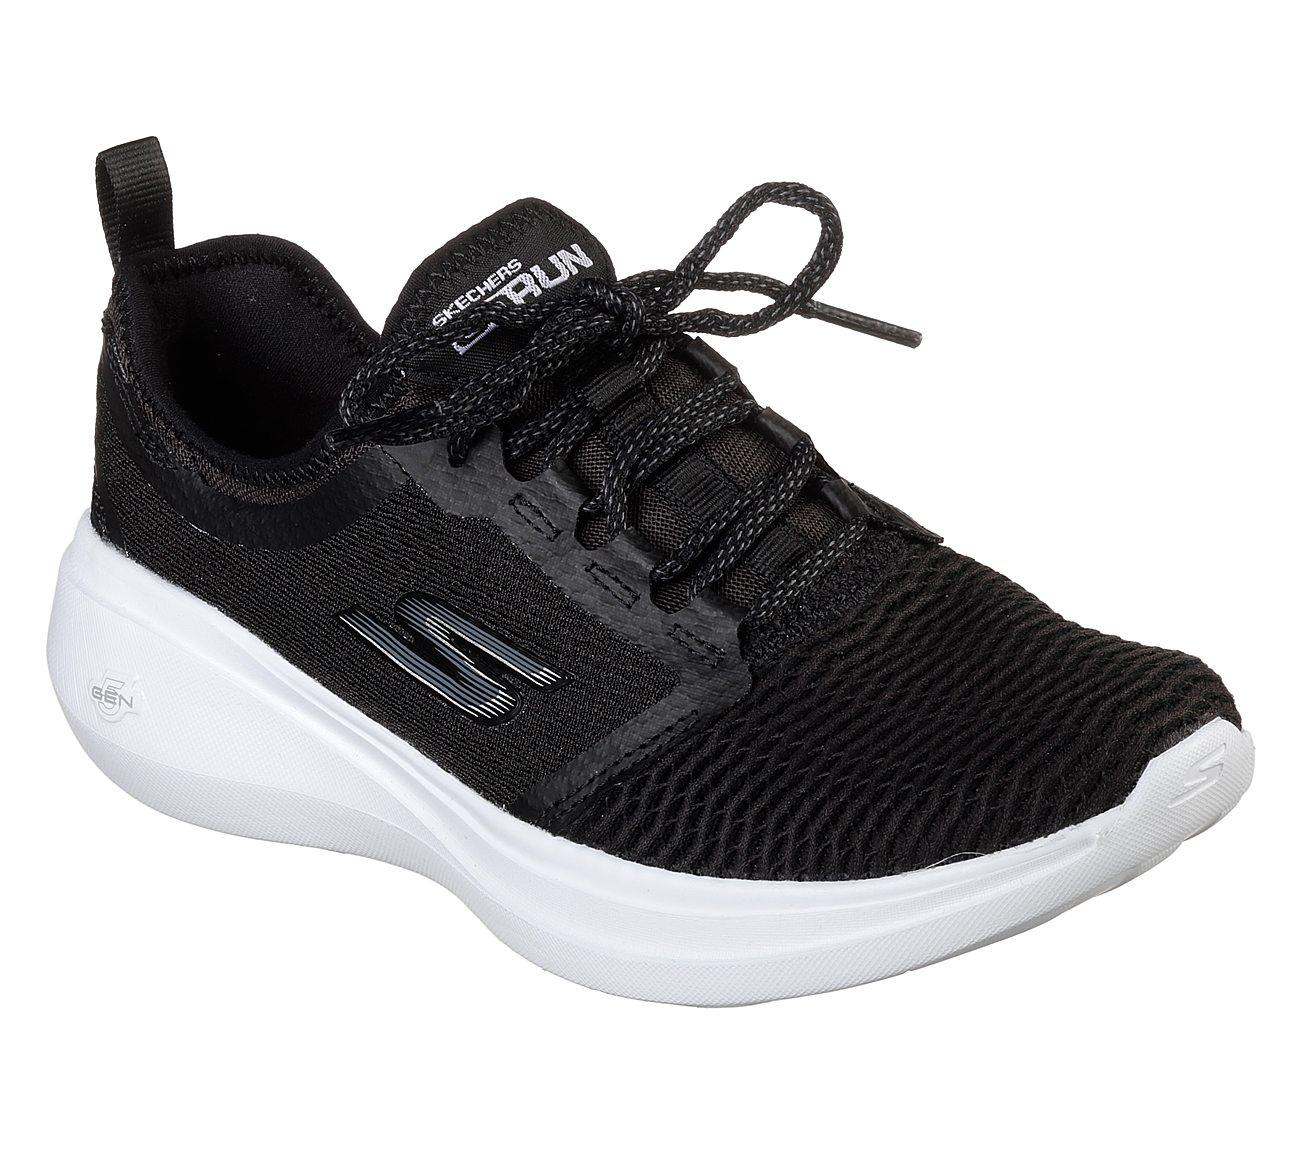 GO RUN FAST -, BLACK/WHITE Footwear Lateral View